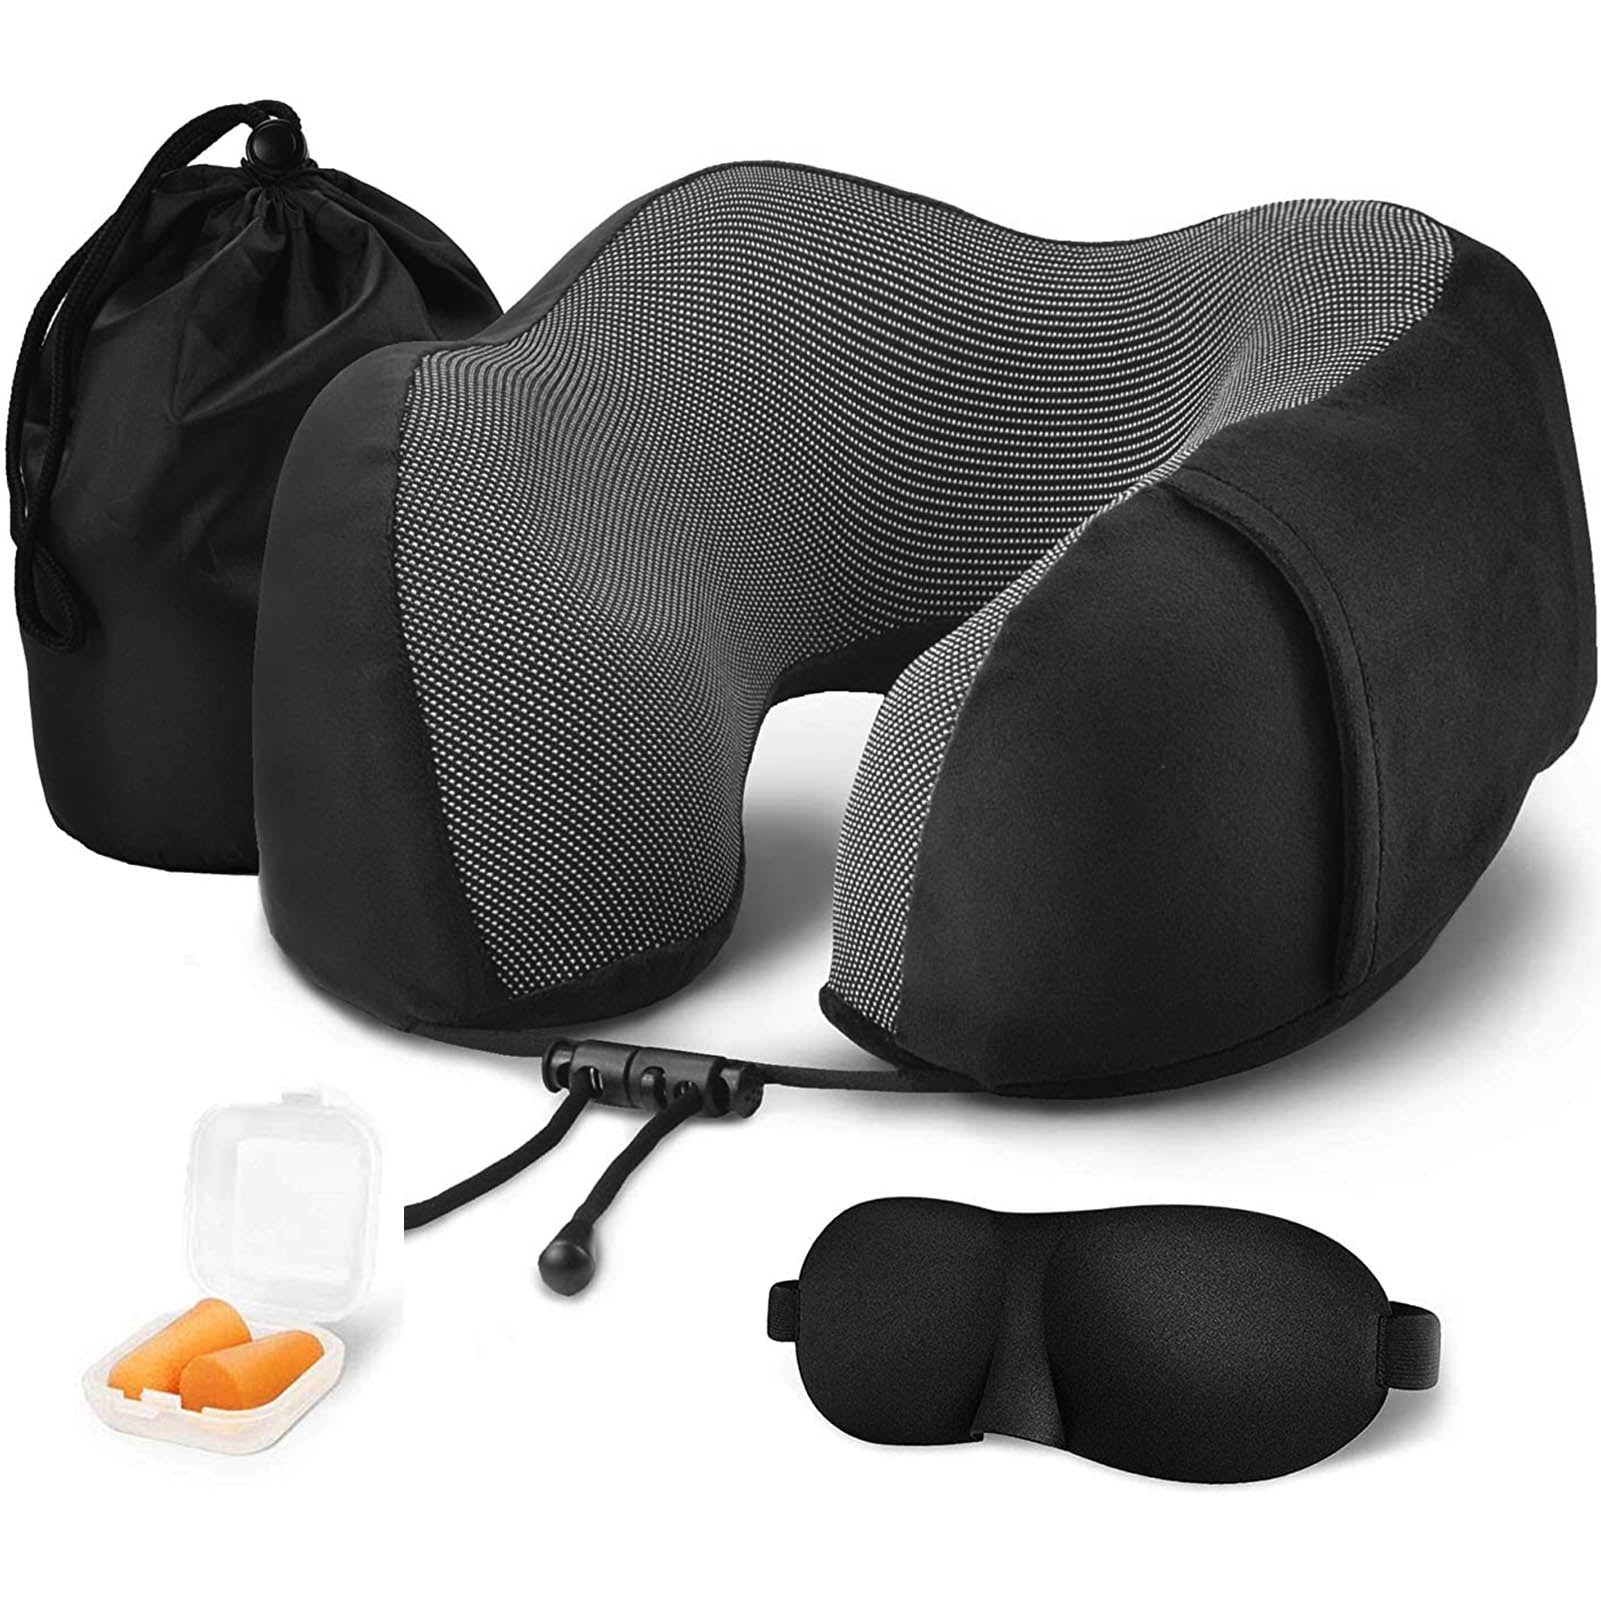 Portable Outdoors Premium Pillow Sleep Cushion Airplane with National Style 